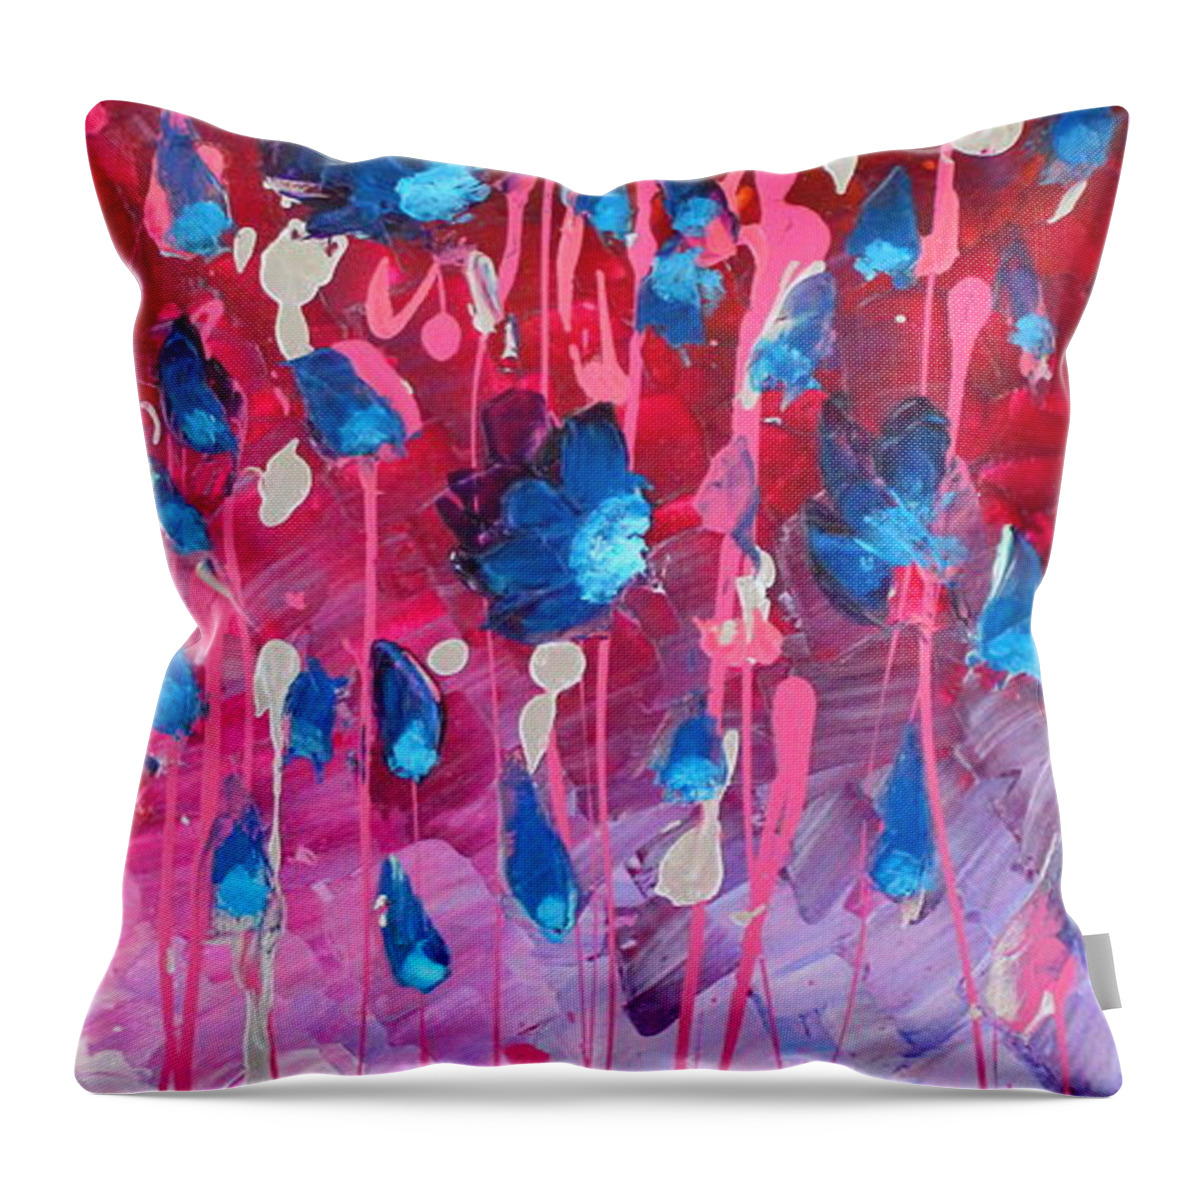 Violet Throw Pillow featuring the painting Magnificent by Preethi Mathialagan